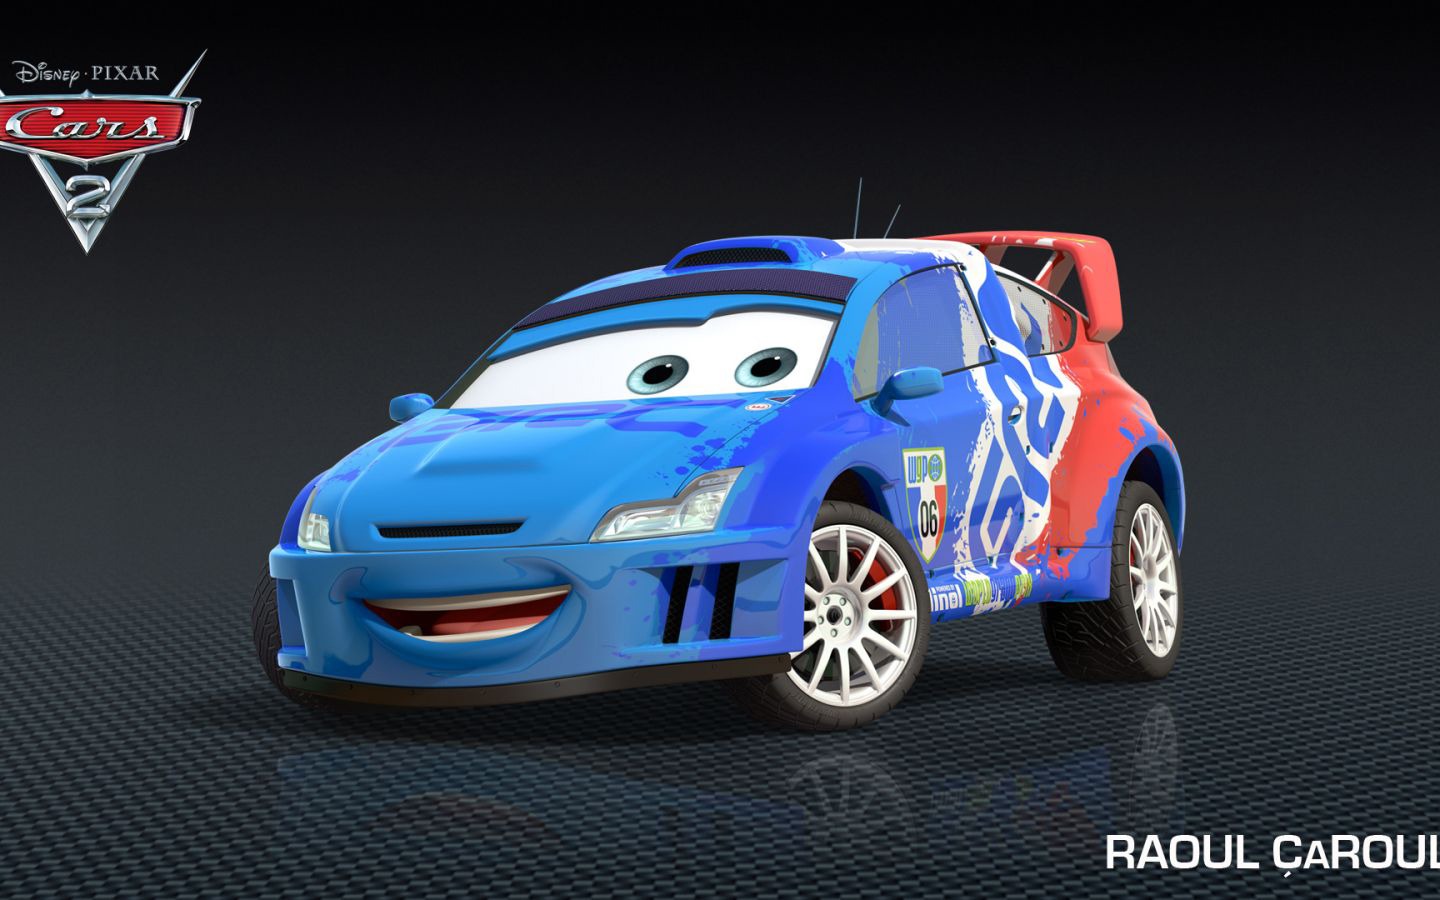 Cars 2 wallpapers #20 - 1440x900